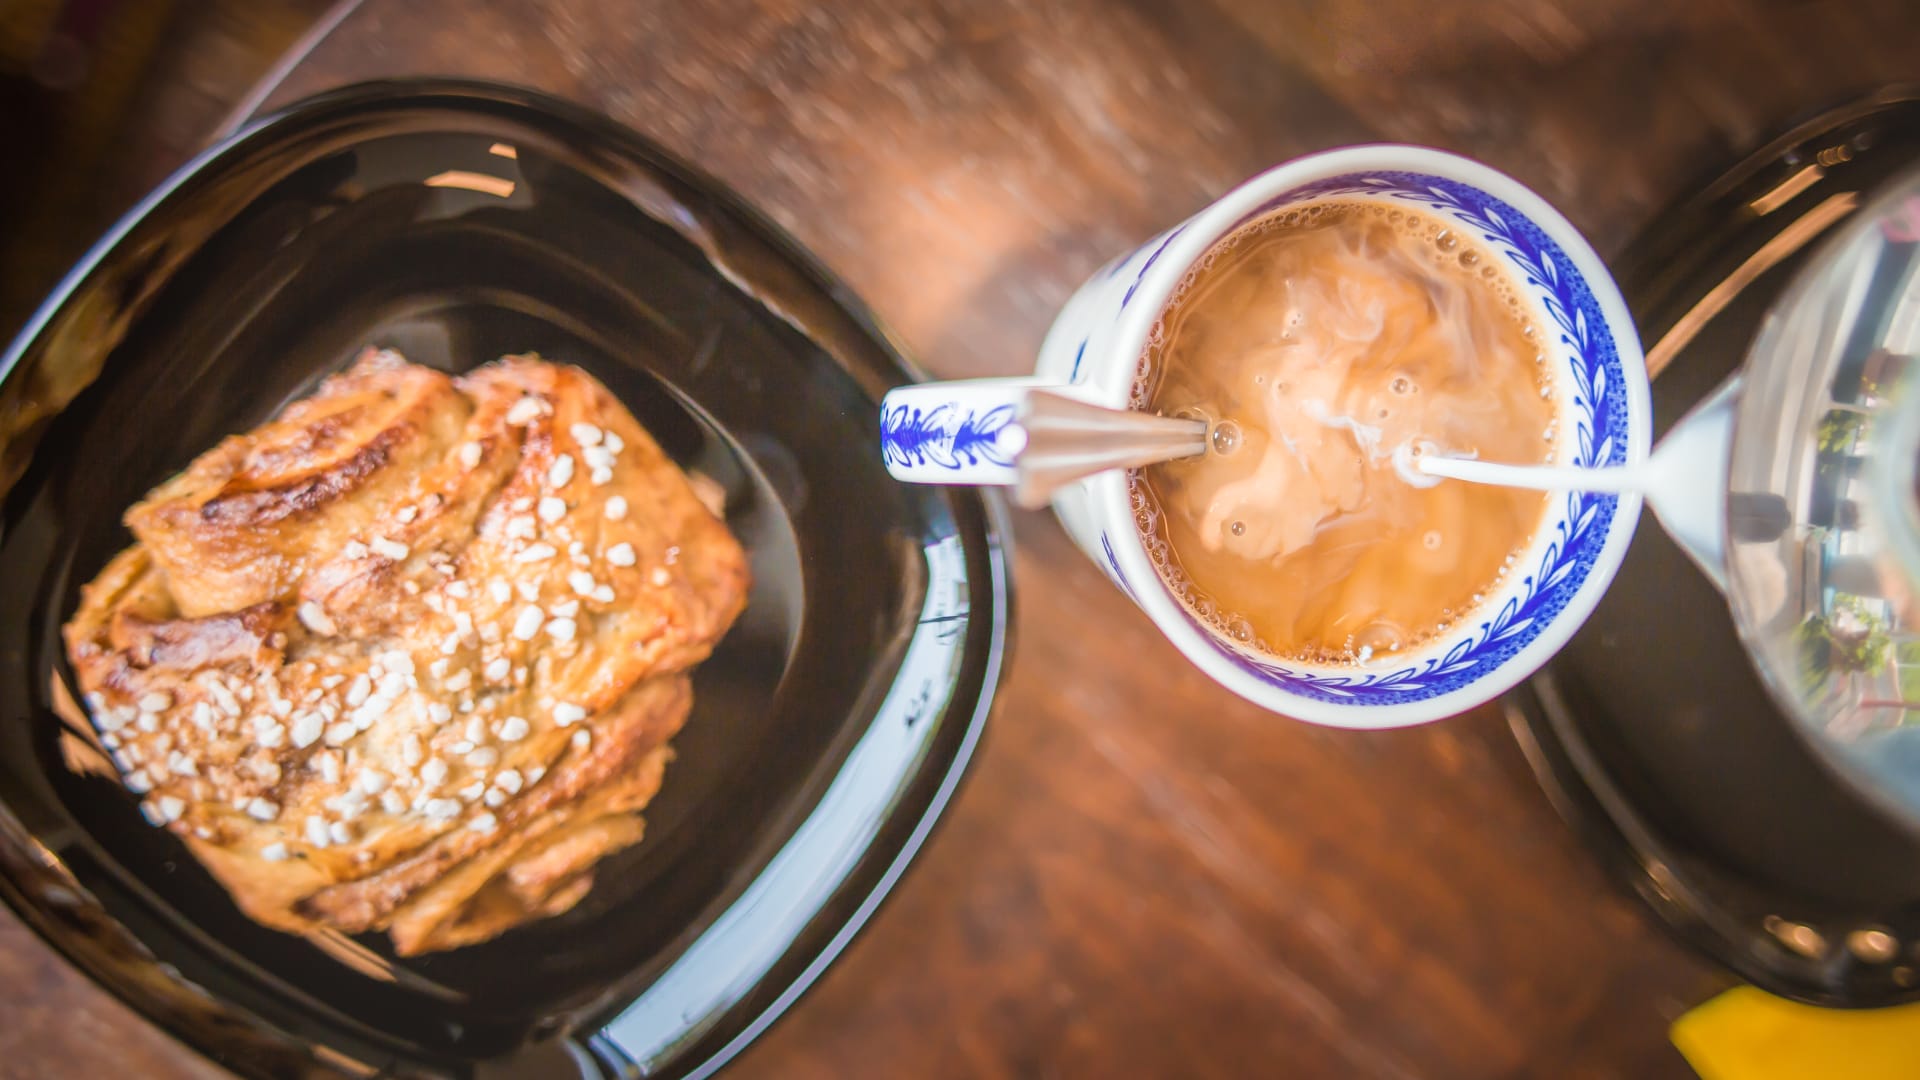 A hand baked Finnish cinnamon roll and a mug of coffee brewed in Finland at Bakery Cafe Puusti, Tampere, Finland